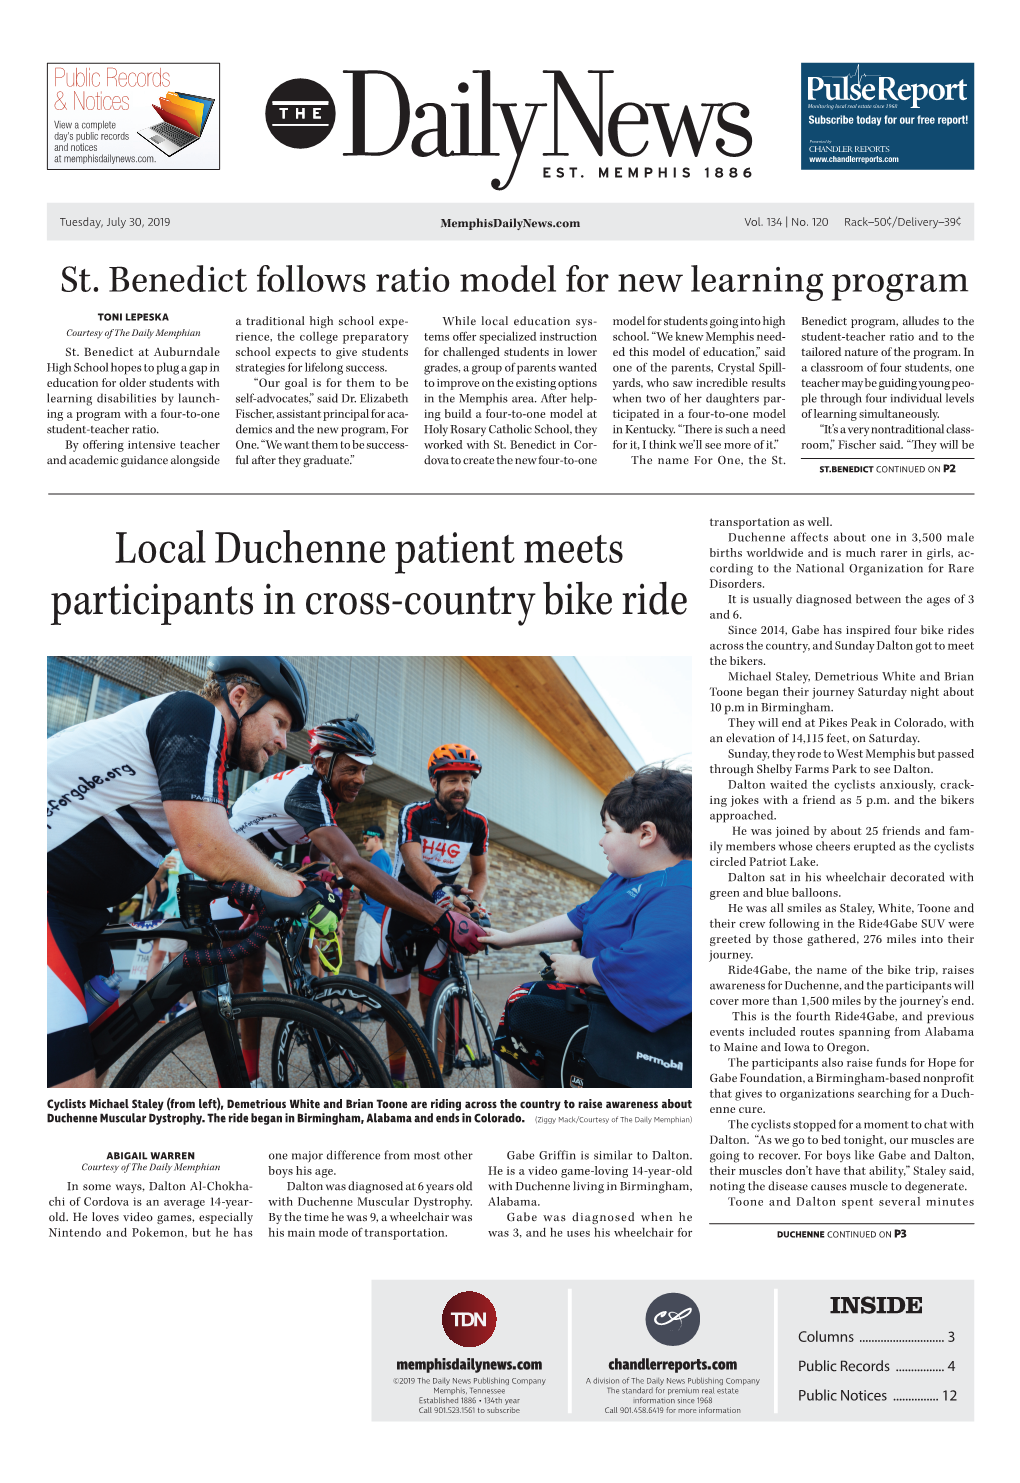 Local Duchenne Patient Meets Participants in Cross-Country Bike Ride